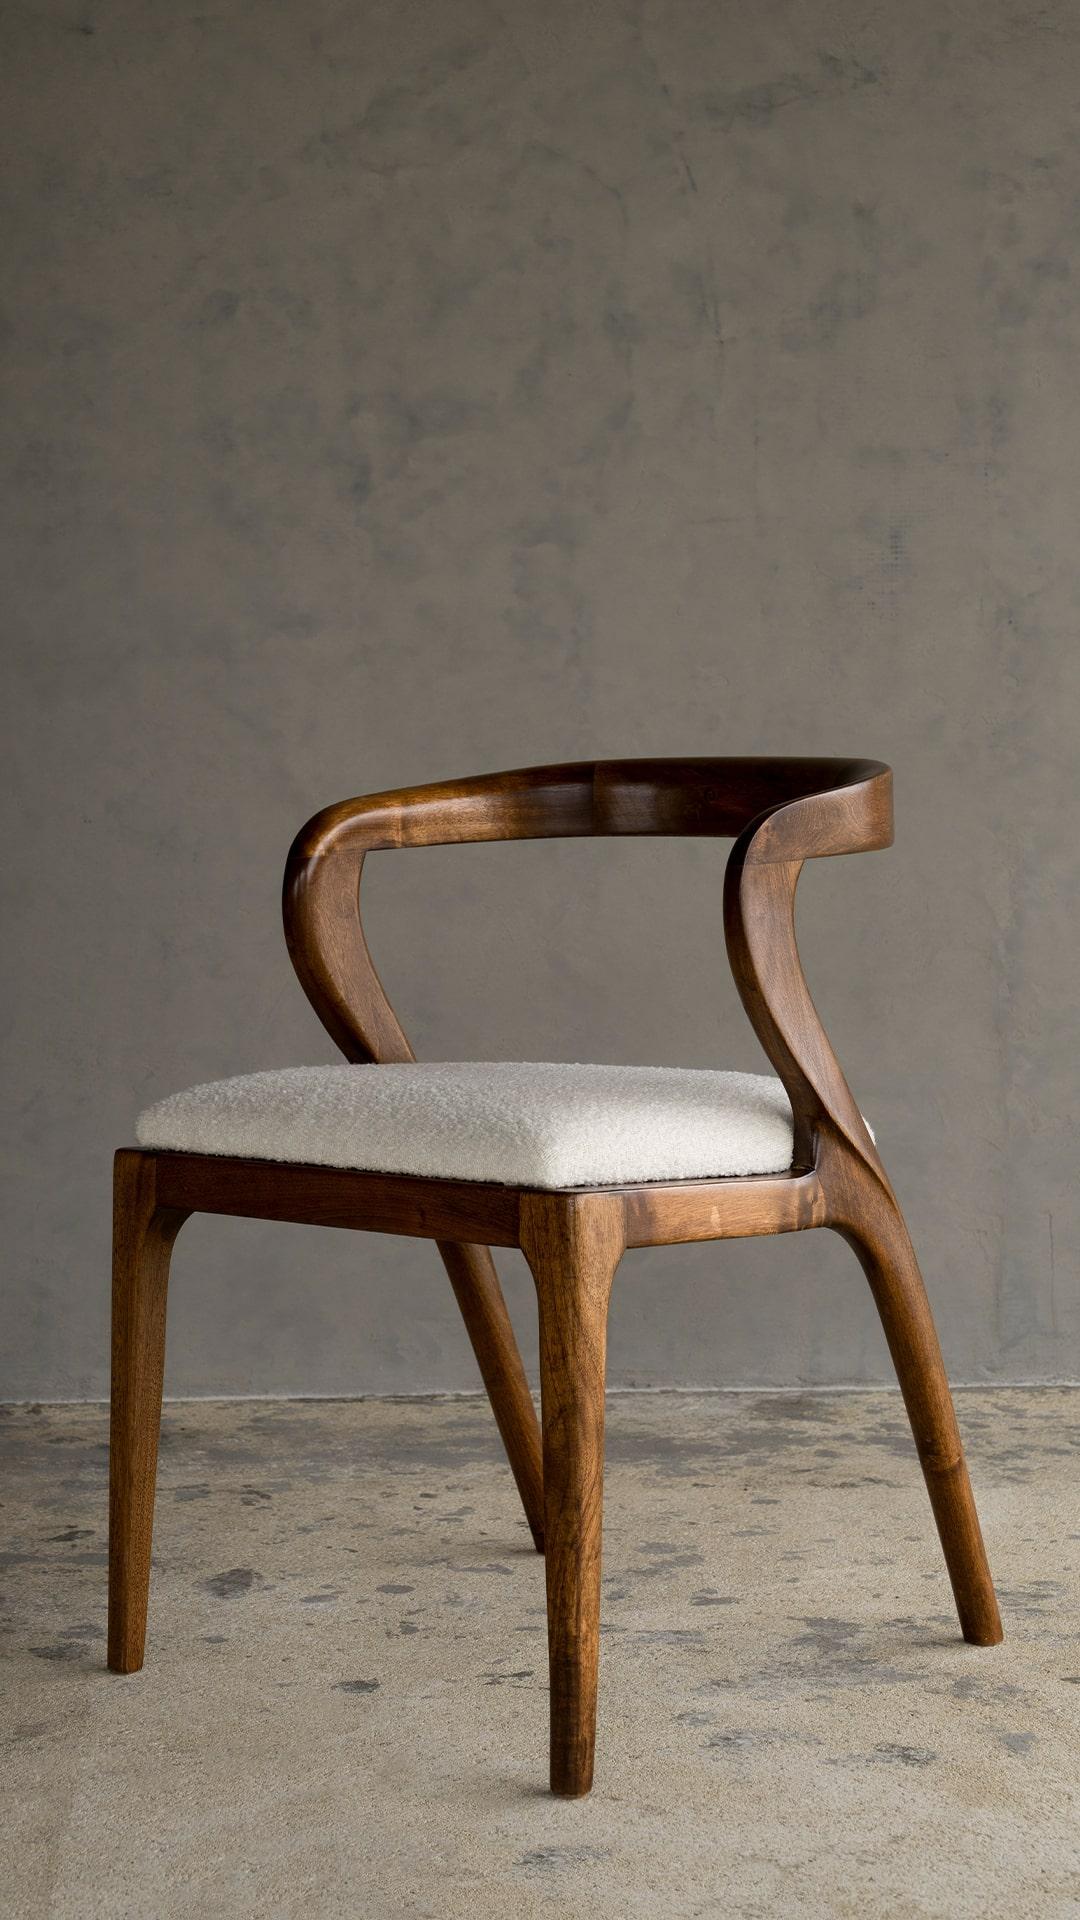 Lagu values and cherishes local production, bringing together the artisanal crafts of boutique producers and user-friendly quality designs in the 'Lagu Selection'.

The elegant piece of the Lagu Selection collection, Nana Chair, stands out with its